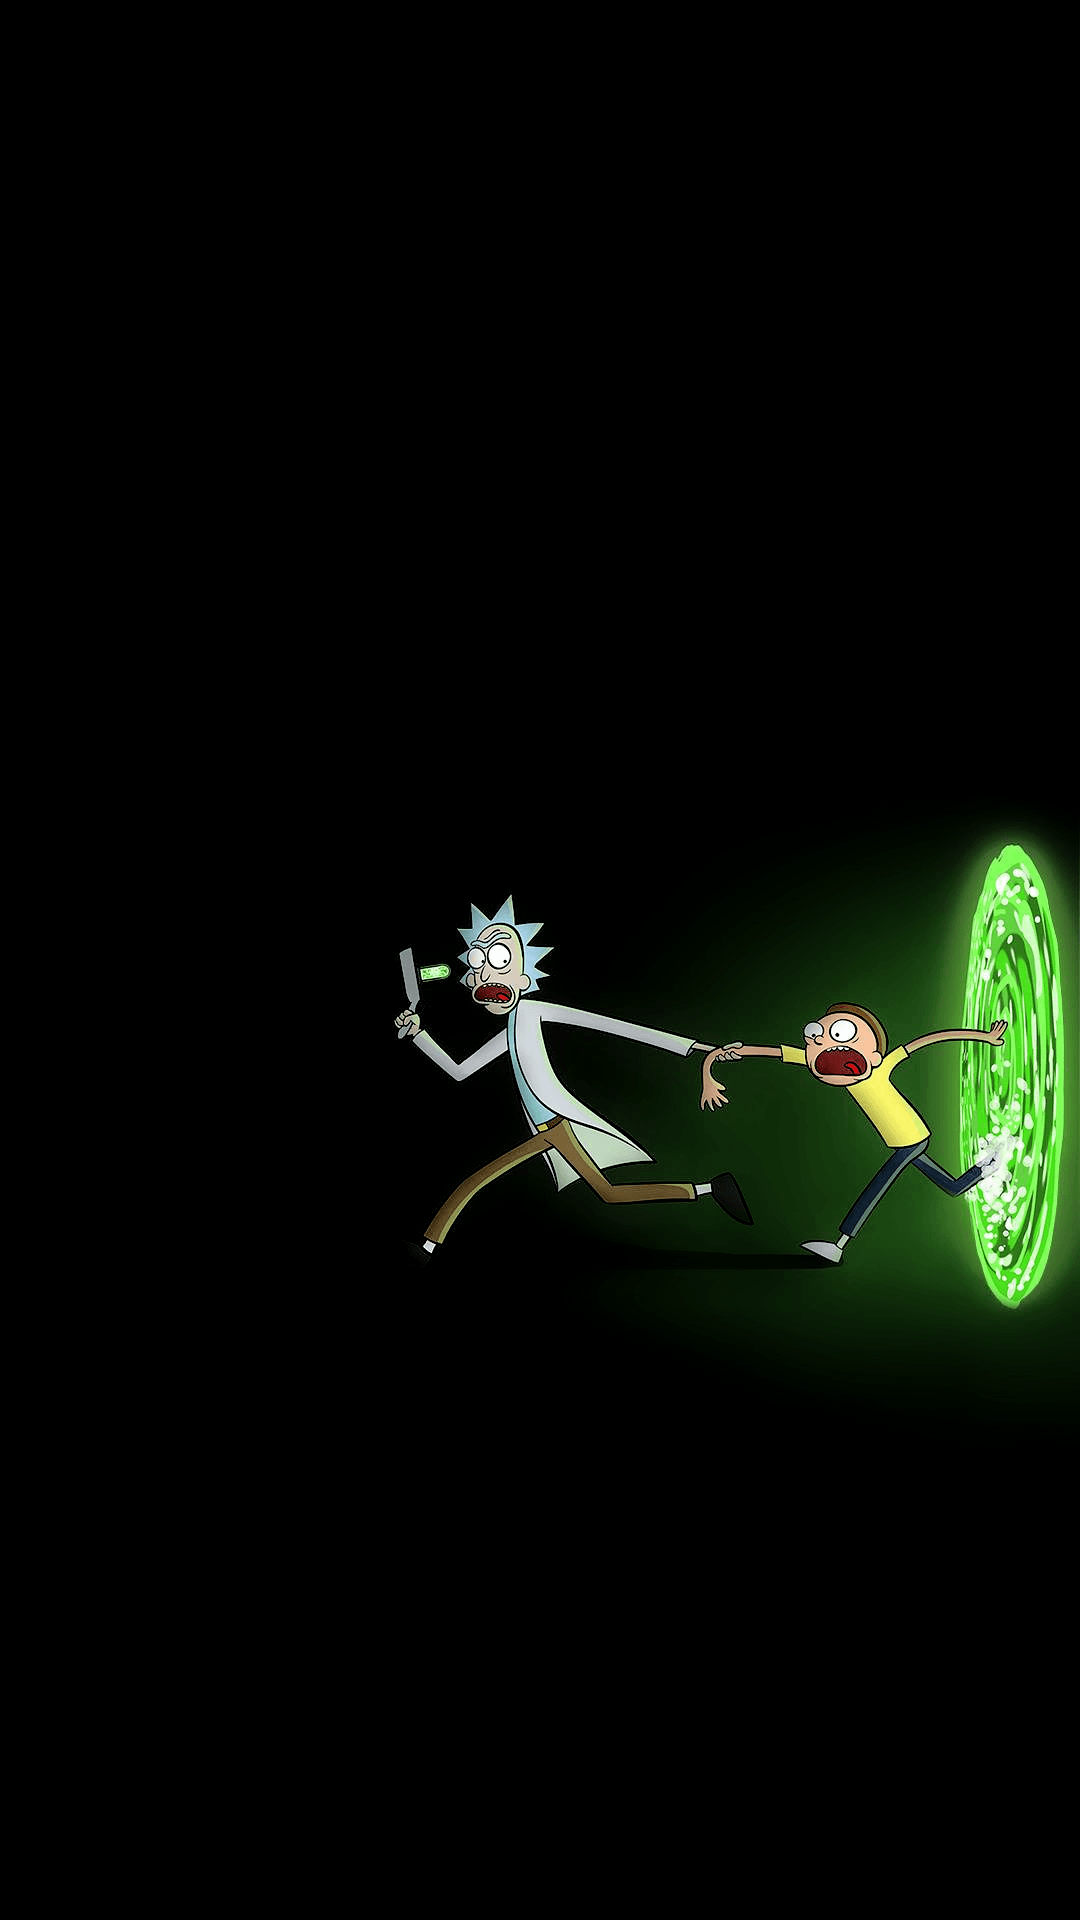 Rick and Morty scaping portal Wallpaper 4k HD ID:9235